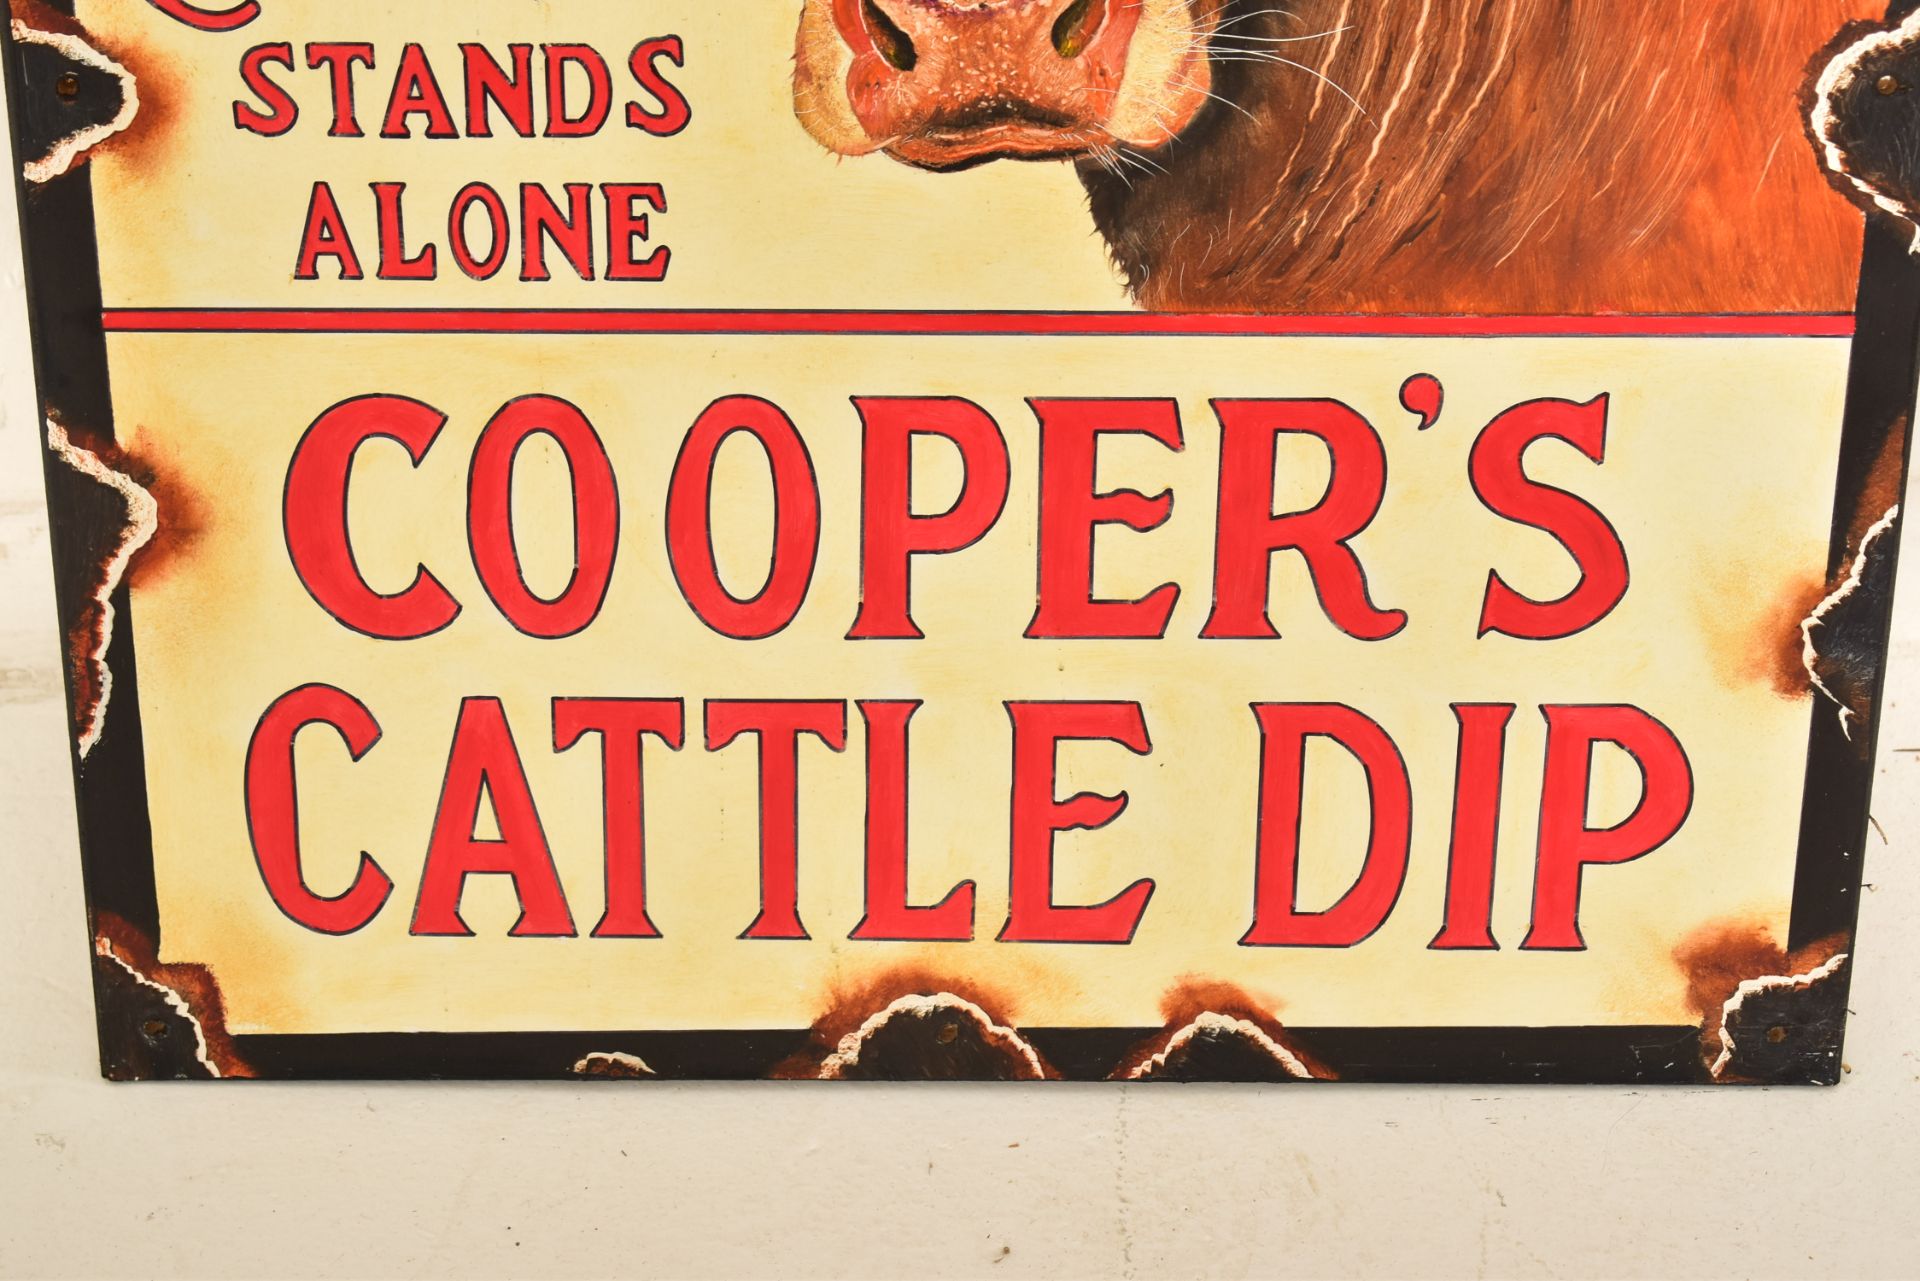 COOPER'S CATTLE DIP - OIL ON BOARD ARTIST IMPRESSION OF A SIGN - Image 2 of 4